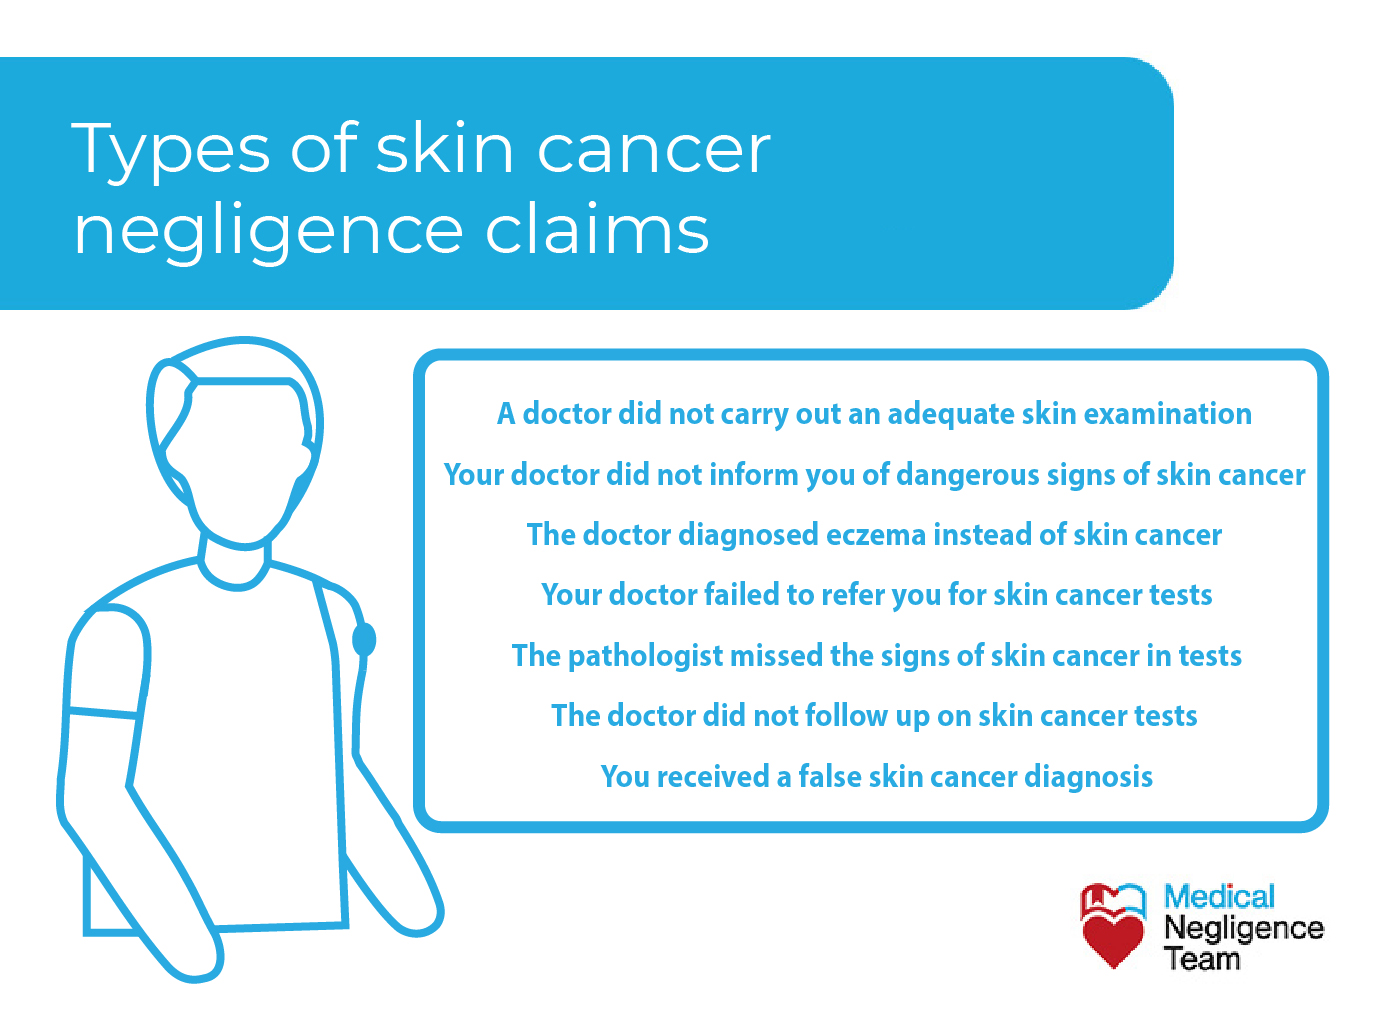 common claims for skin cancer misdiagnosis